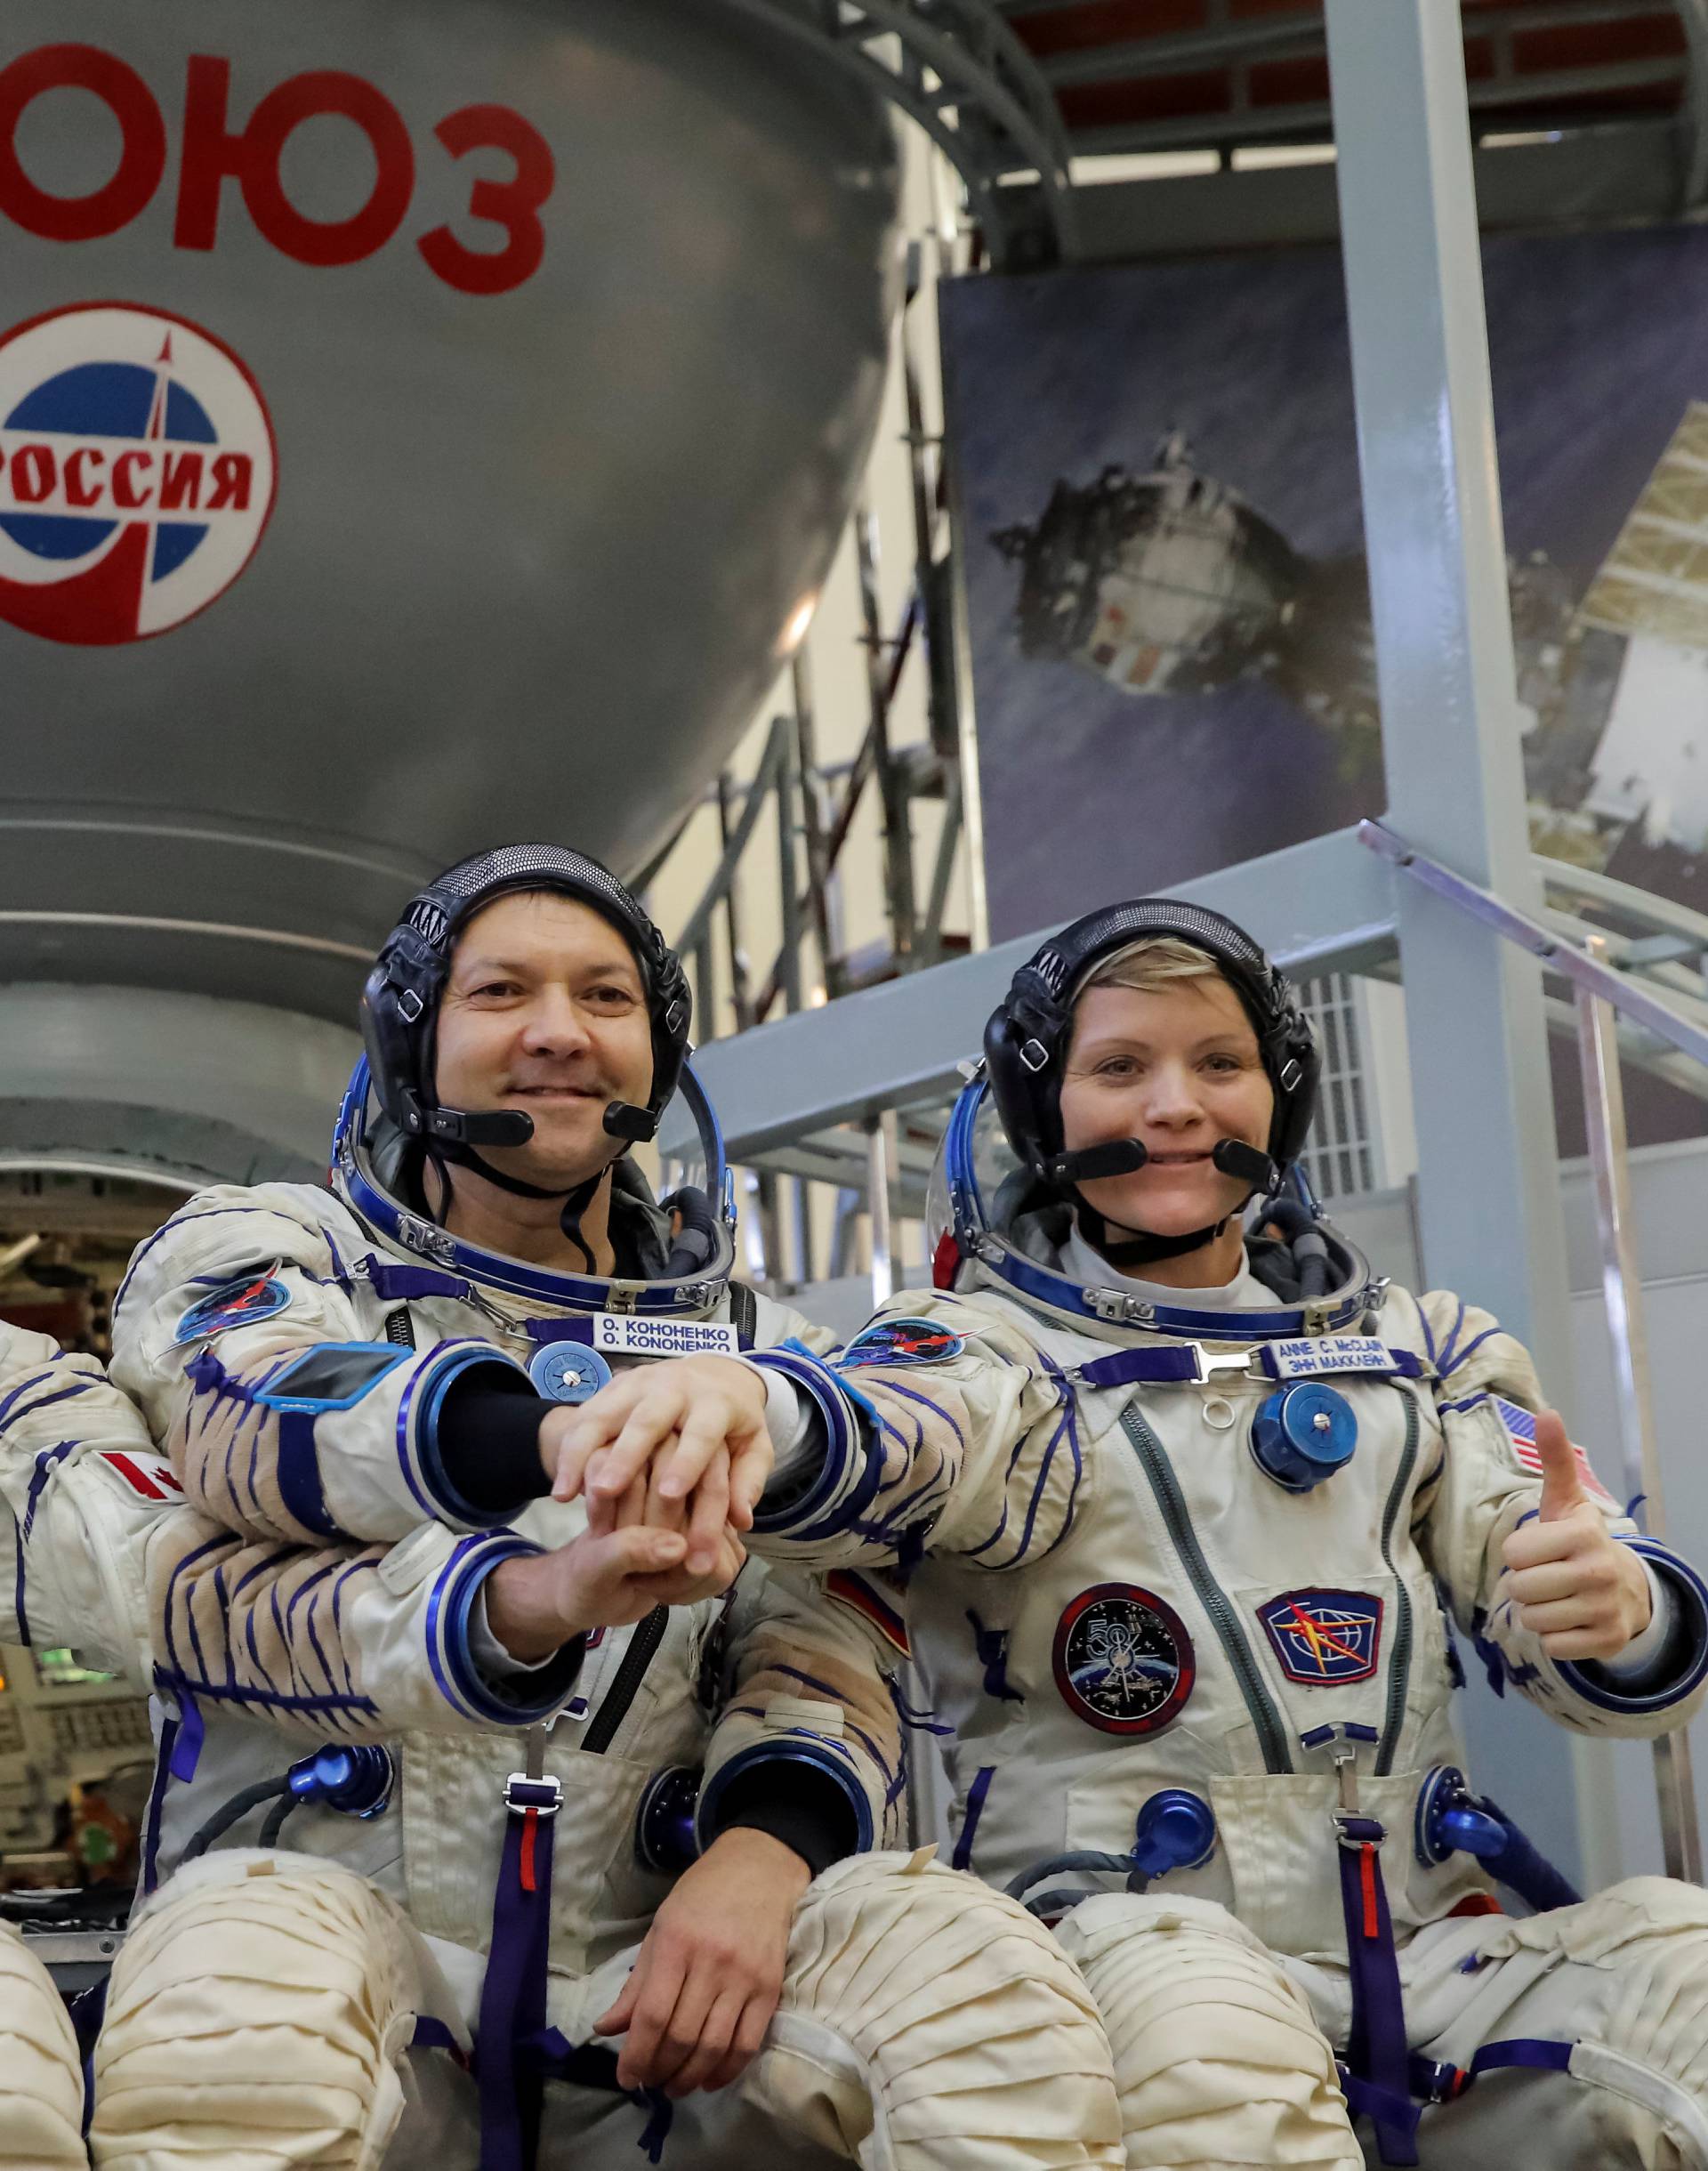 Crew members of the International Space Station (ISS) pose for a picture as they attend the final qualification training for their upcoming space mission in Star City